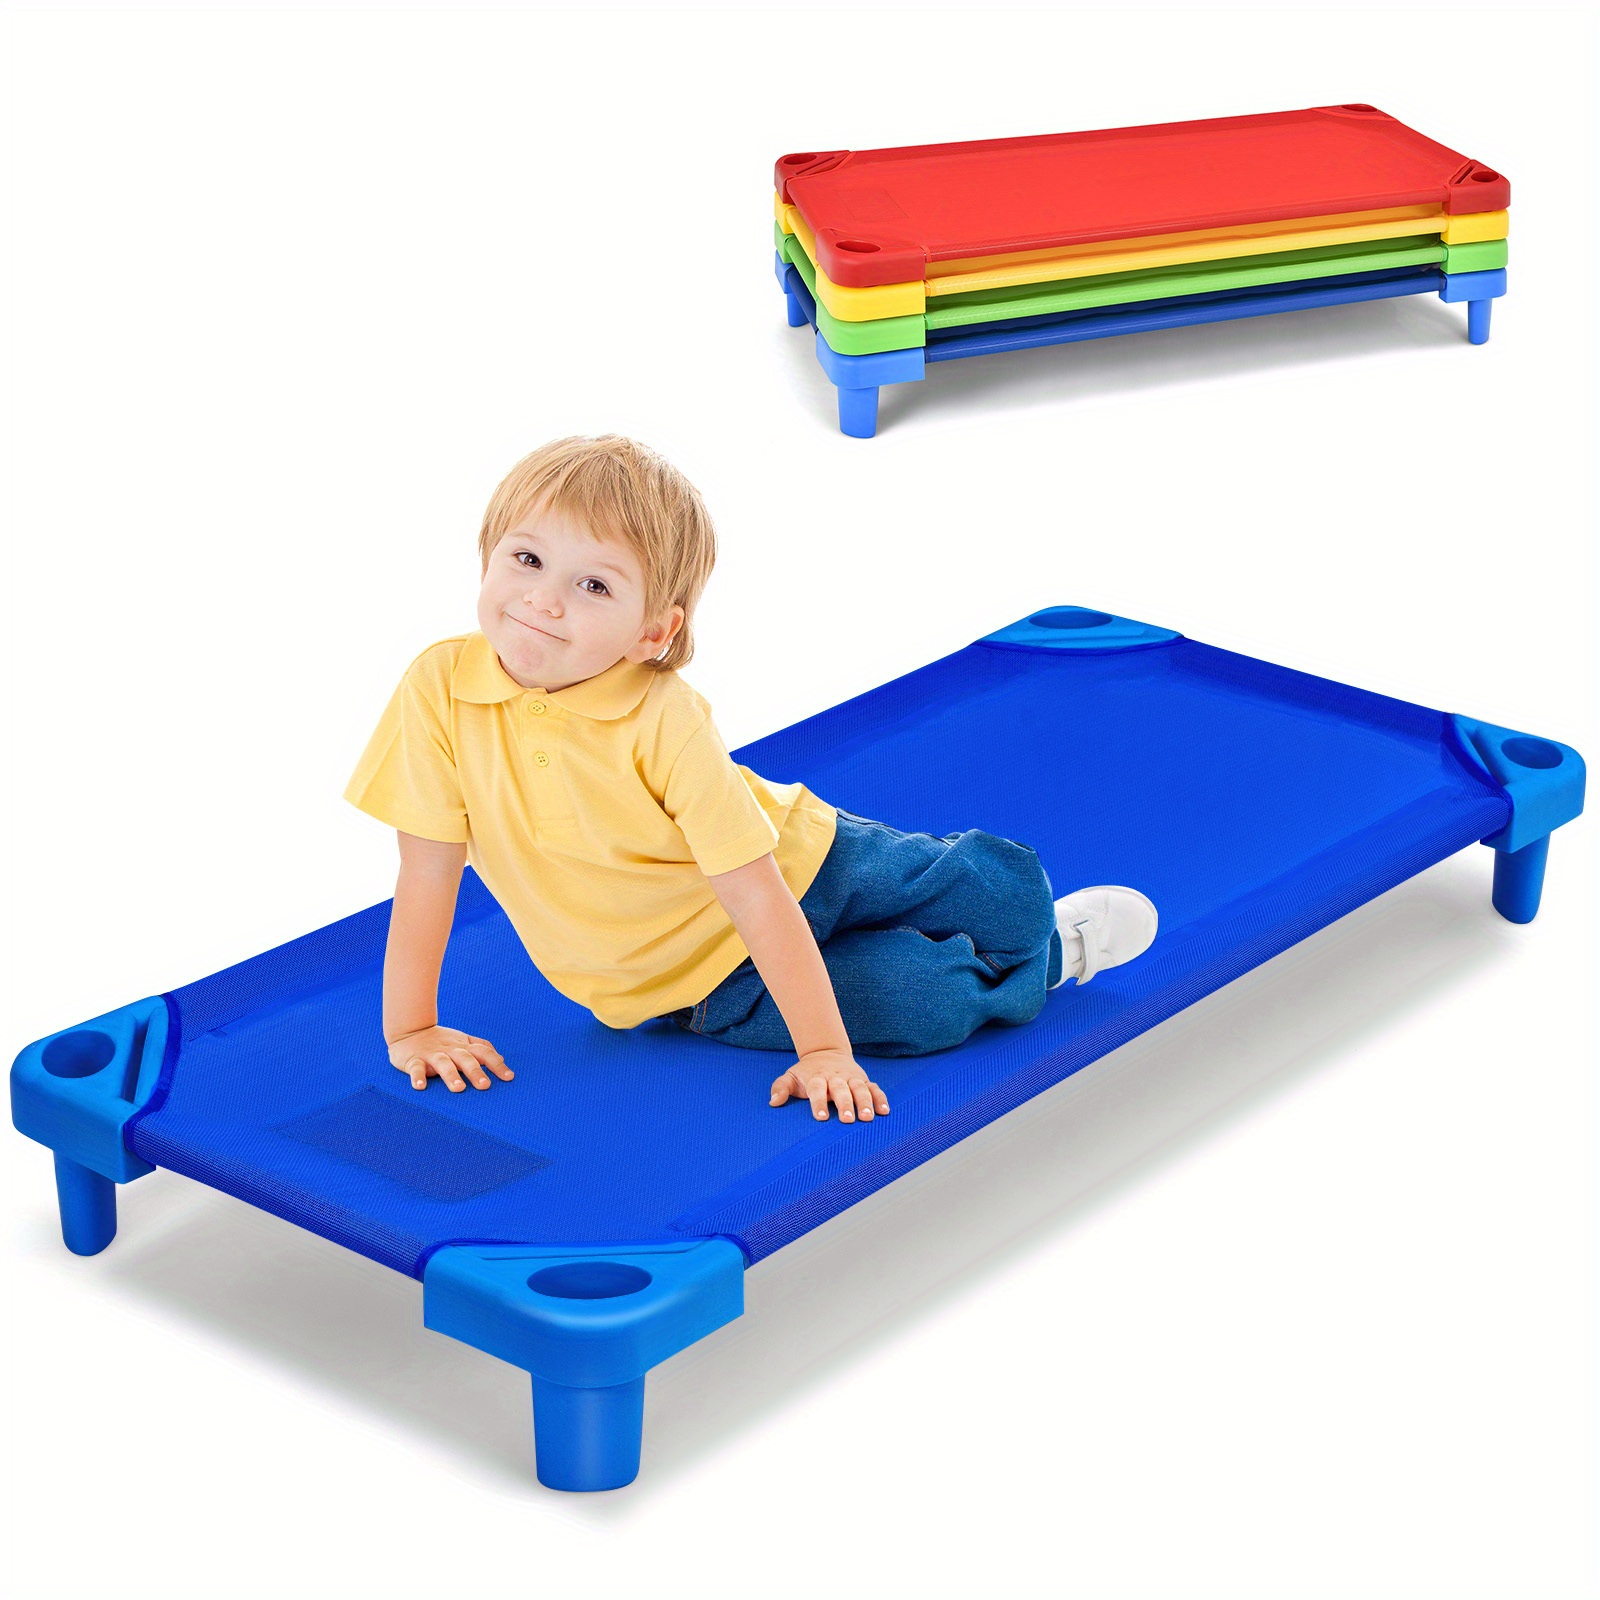 

Lifezeal Pack Of 4 Kids Stackable Cot 51"lx23"w Daycare Rest Mat Colorful Christmas Gift